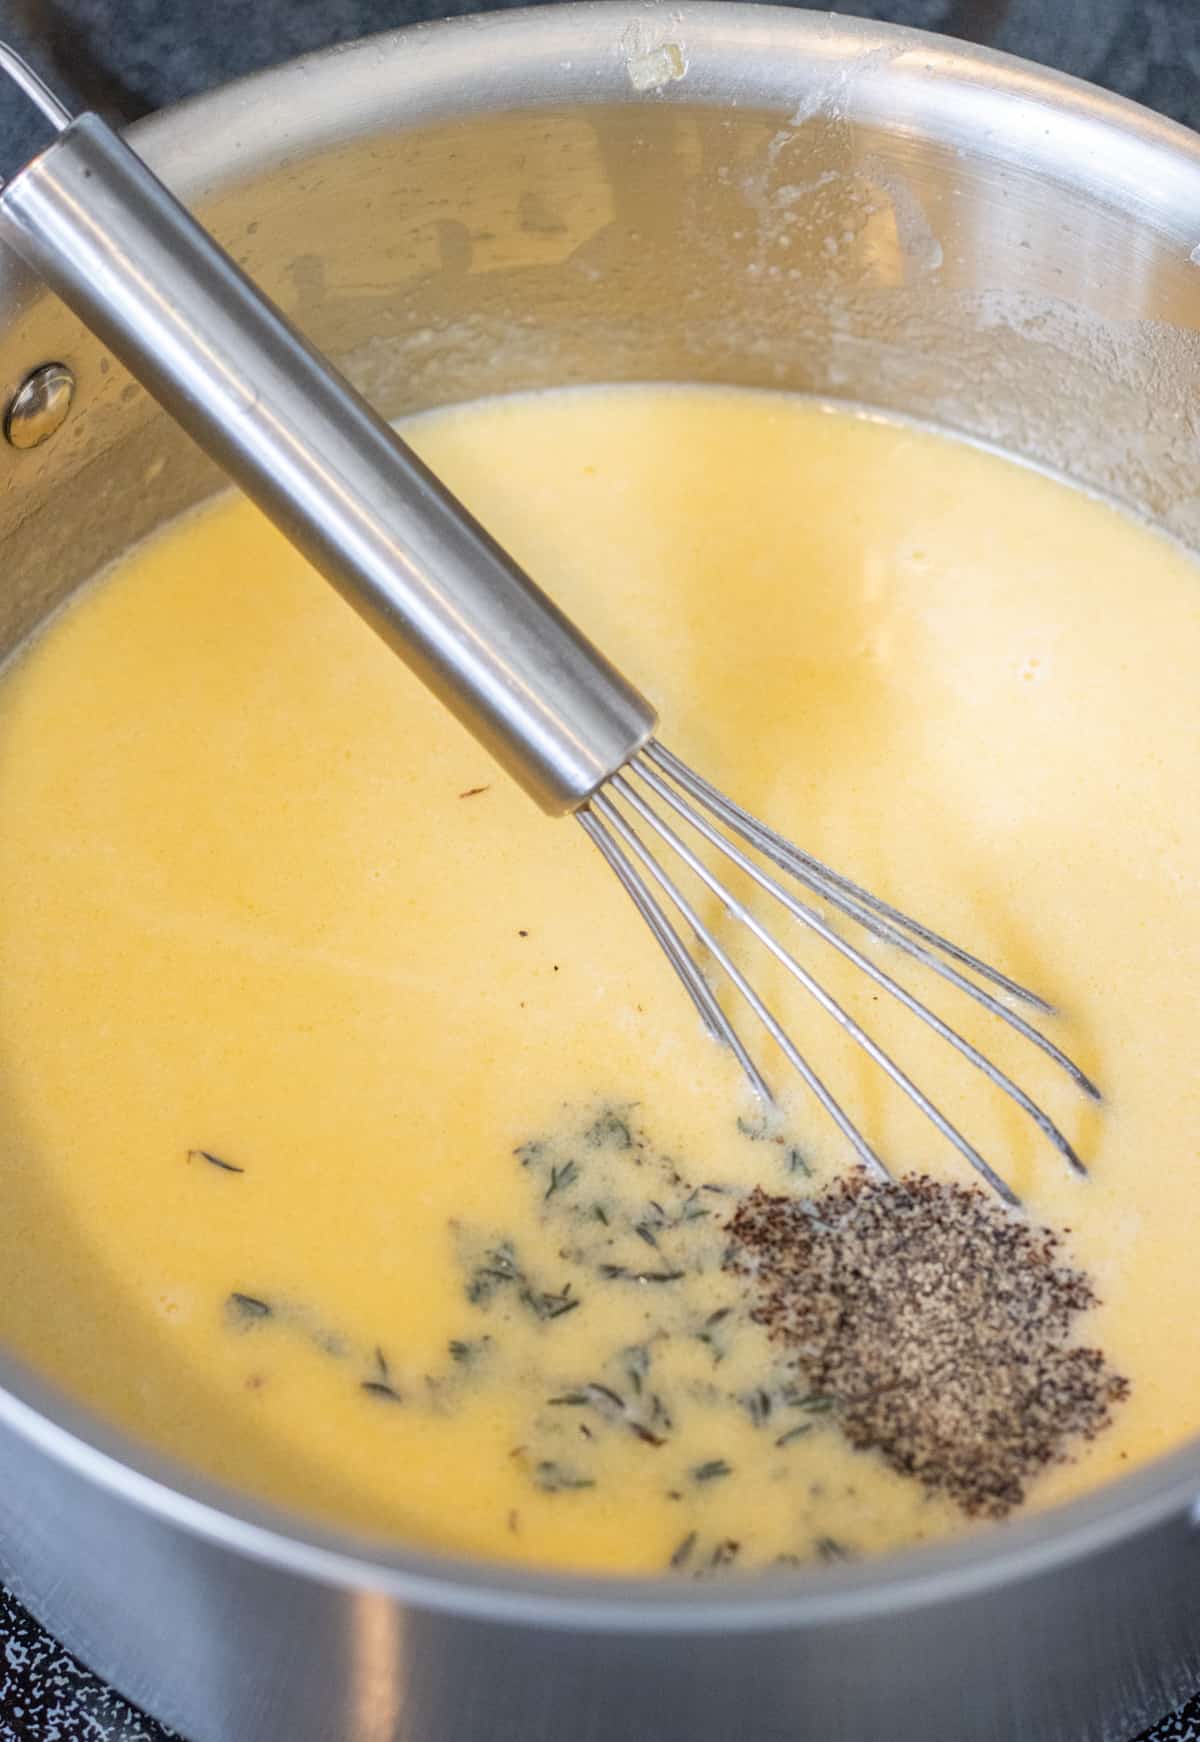 Salt, pepper, and thyme added to the cream sauce with a whisk.